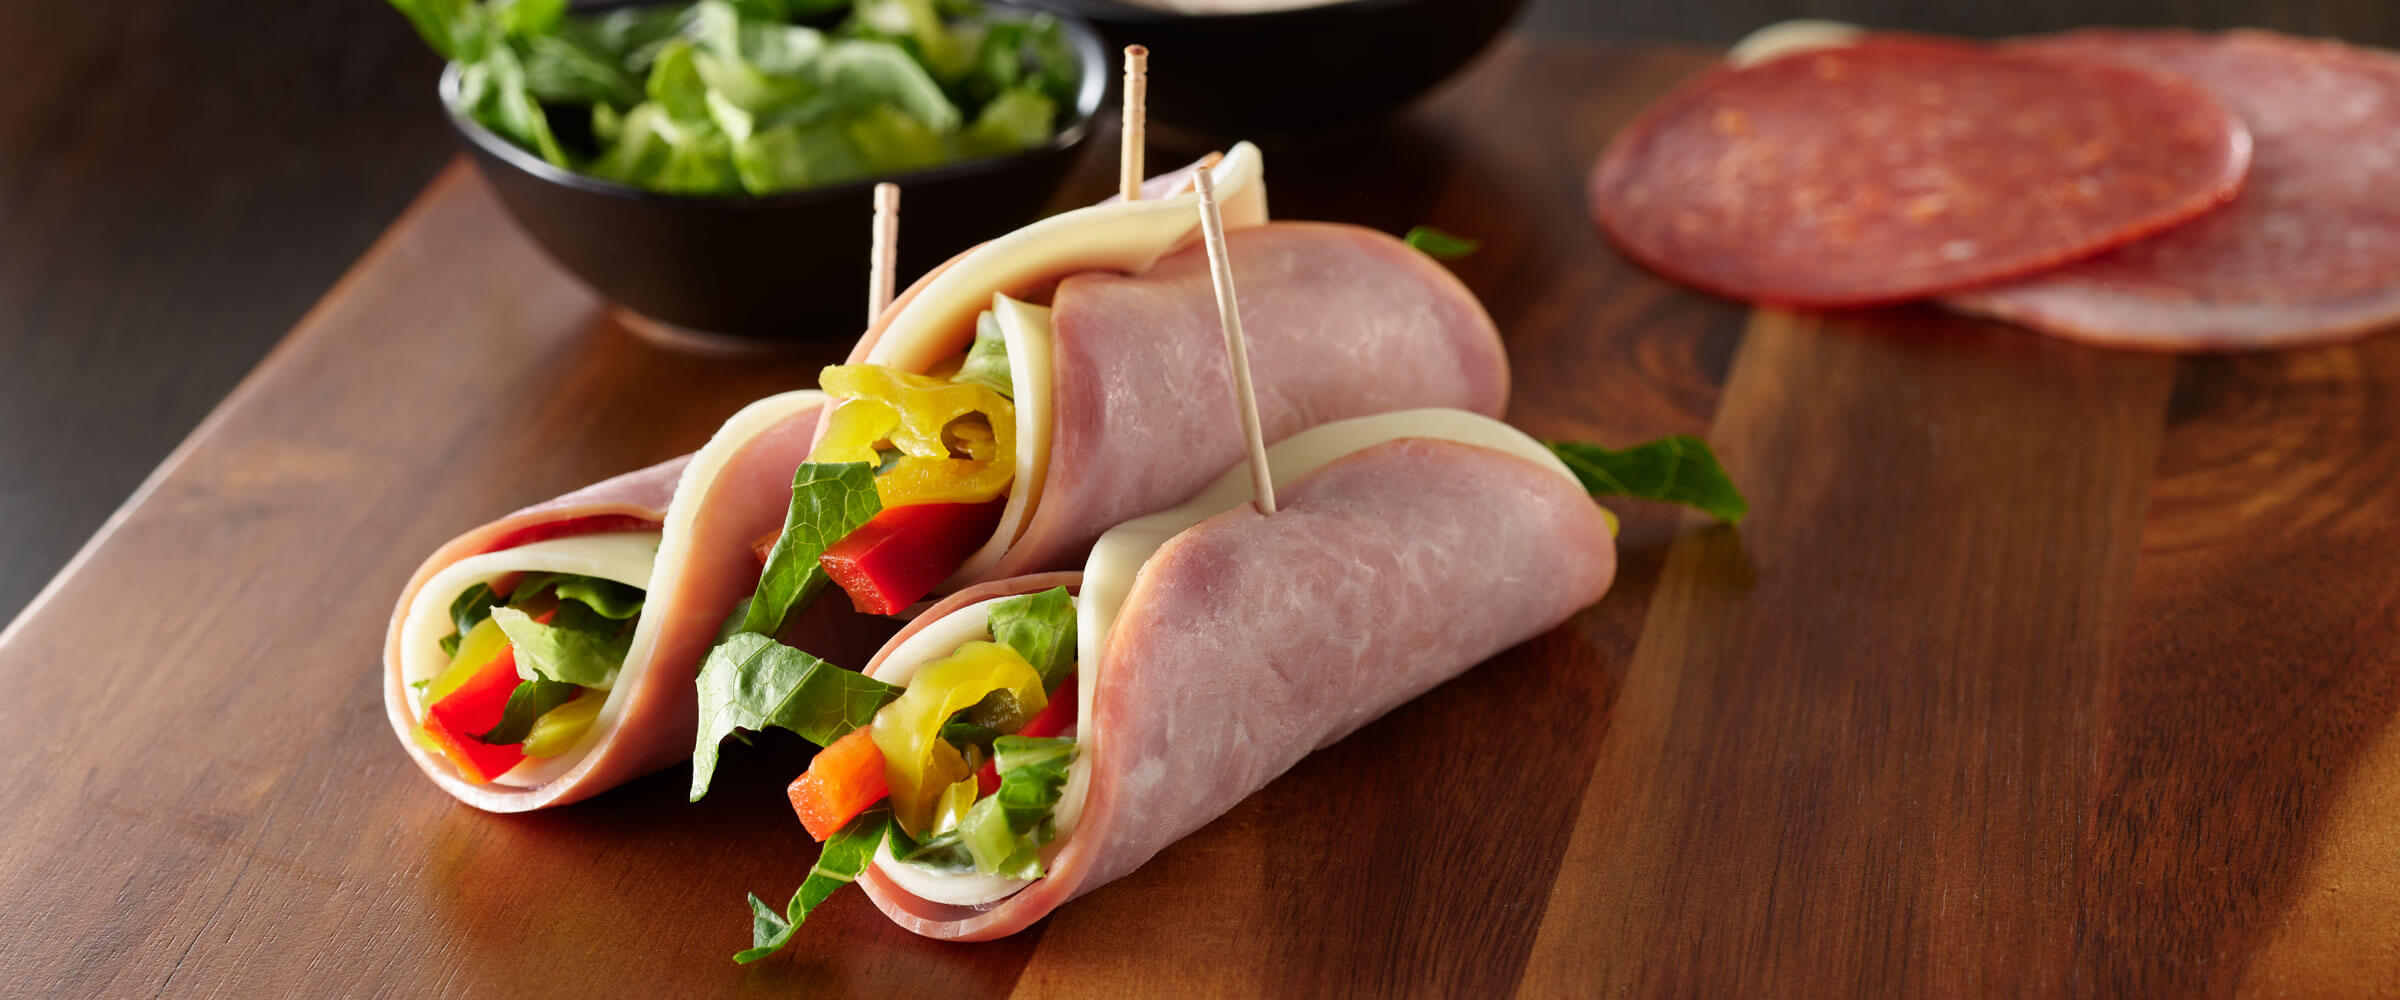 Italian Rolled Sandwiches with vegetables and toothpick on wood board